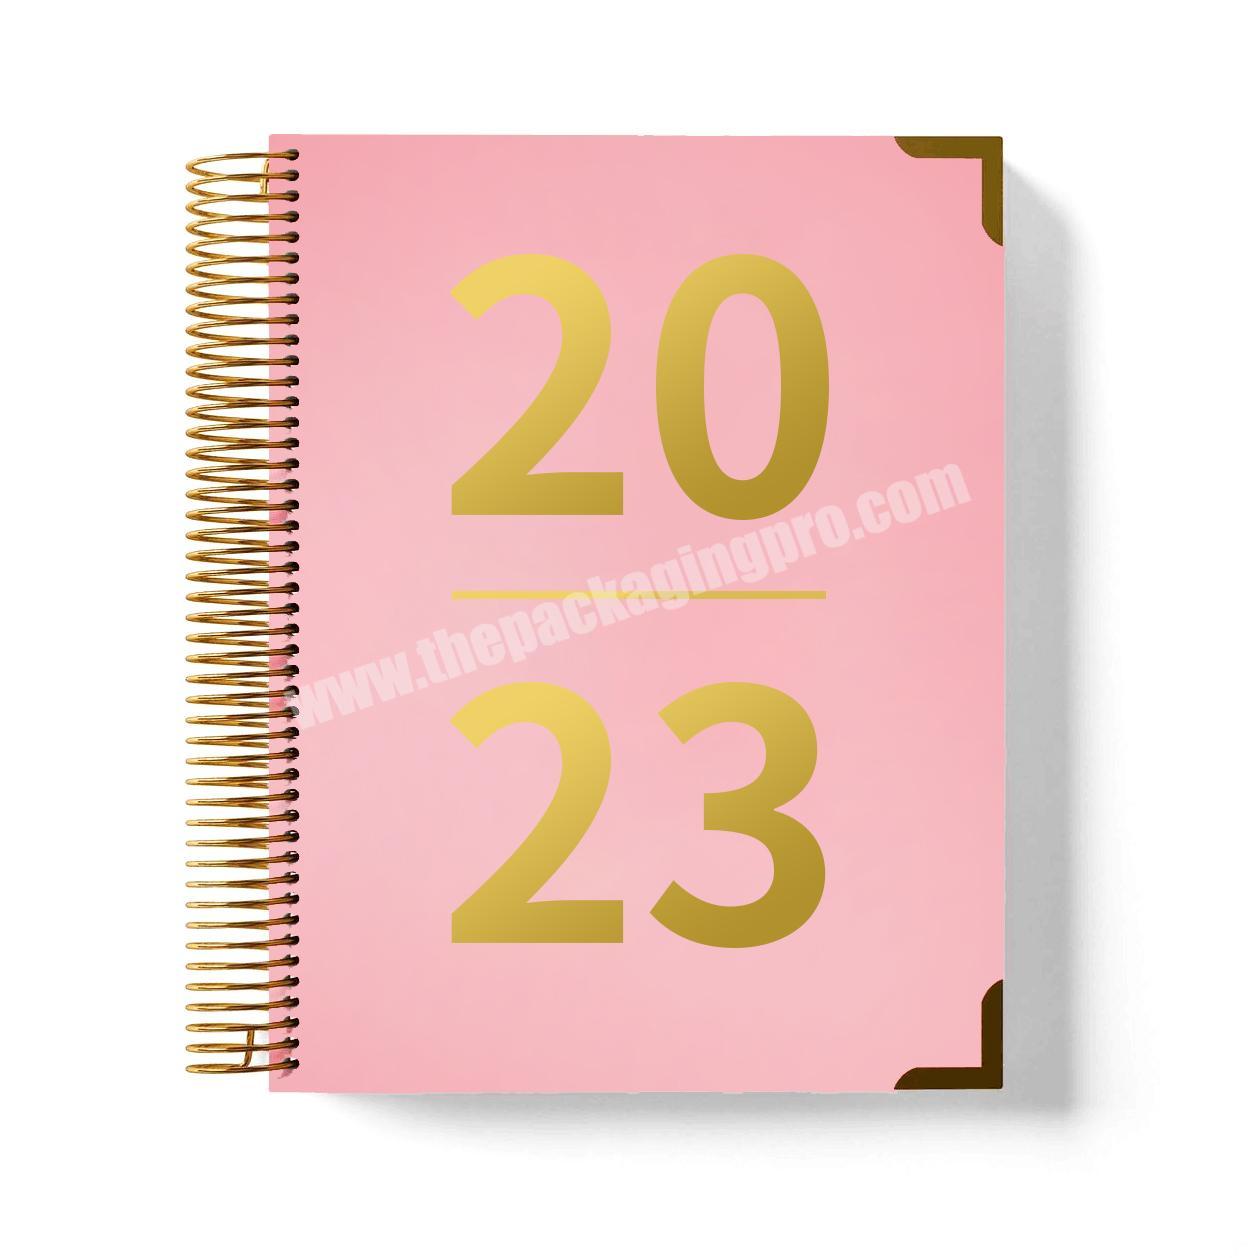 Free Sample 2022 Girls Gift Stationery Planner Suppliers Customized Gold Foil Printing Blush Pink Planner Organizer Journal